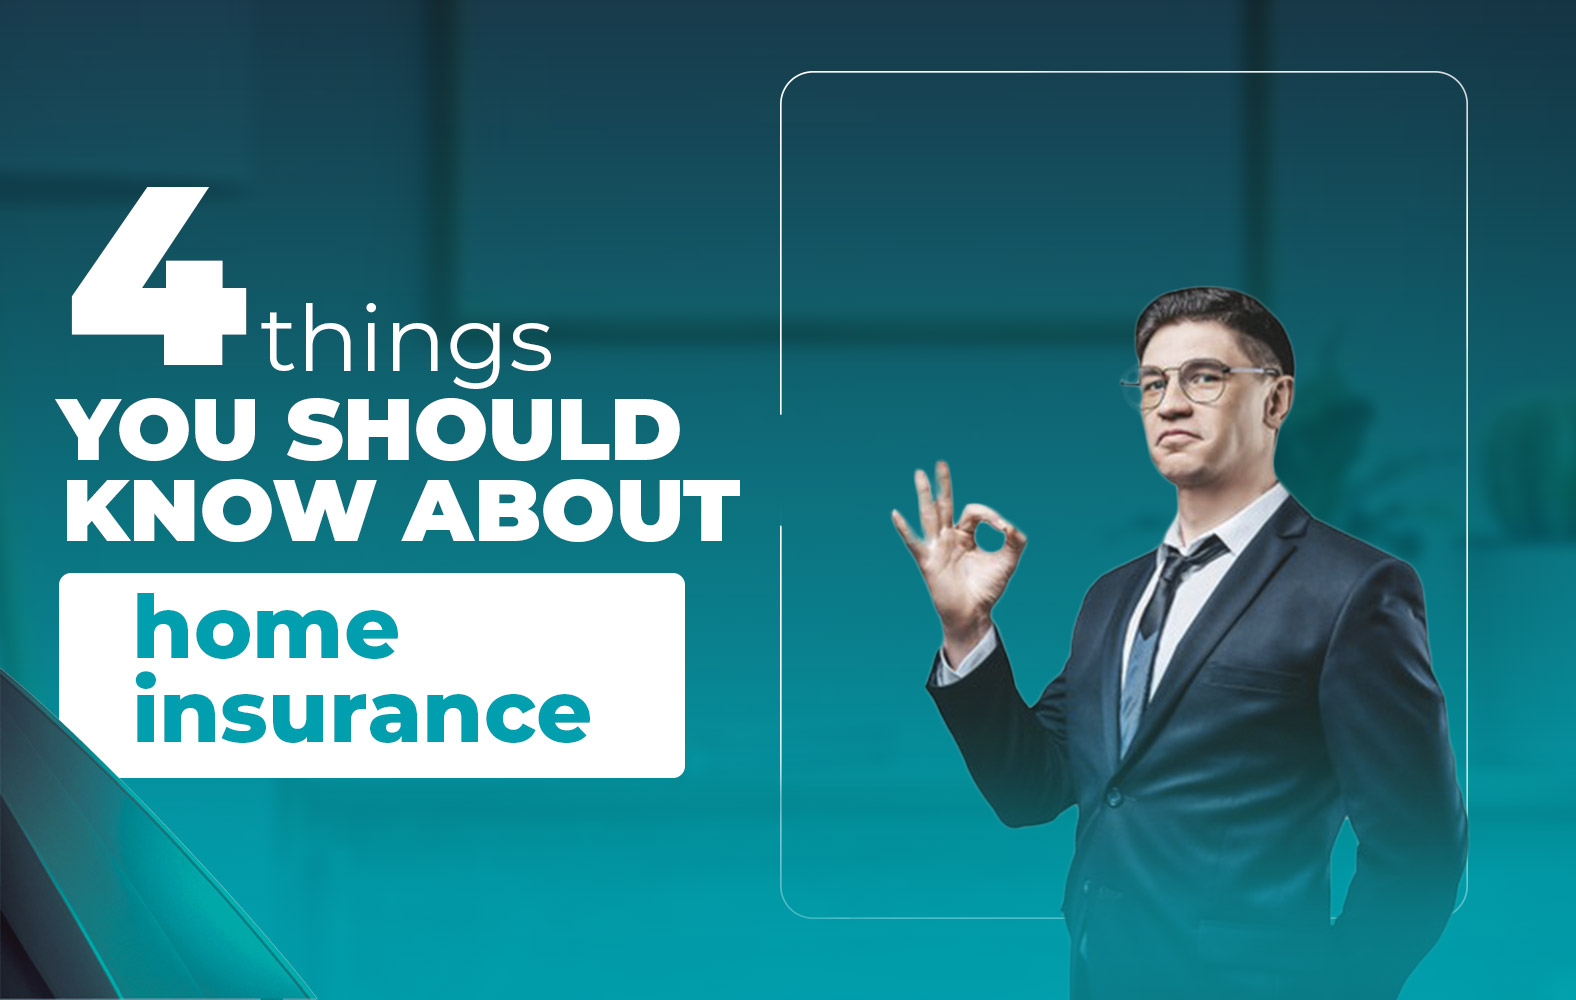 Things you should know about your home insurance